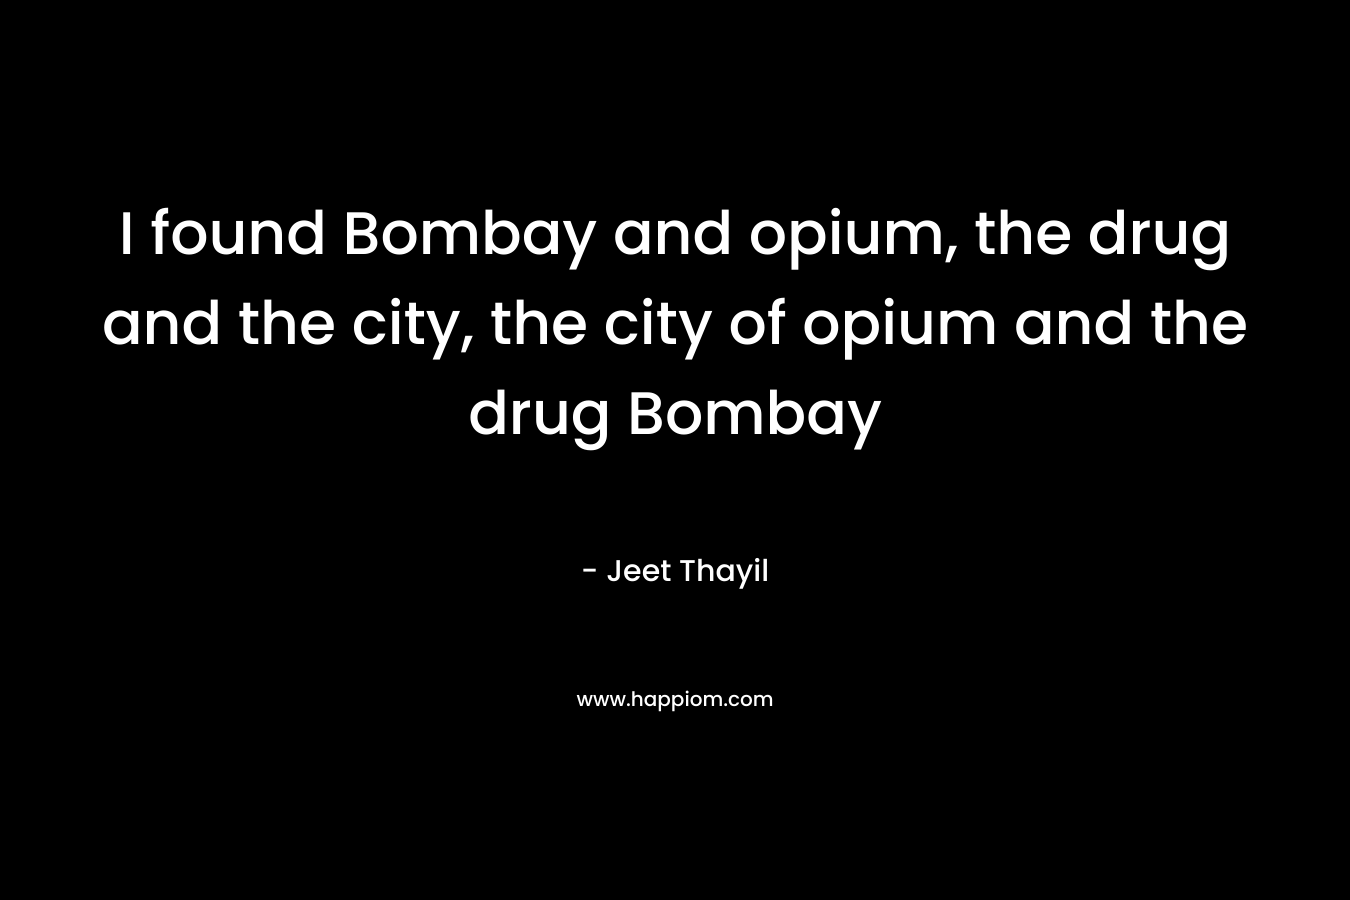 I found Bombay and opium, the drug and the city, the city of opium and the drug Bombay – Jeet Thayil